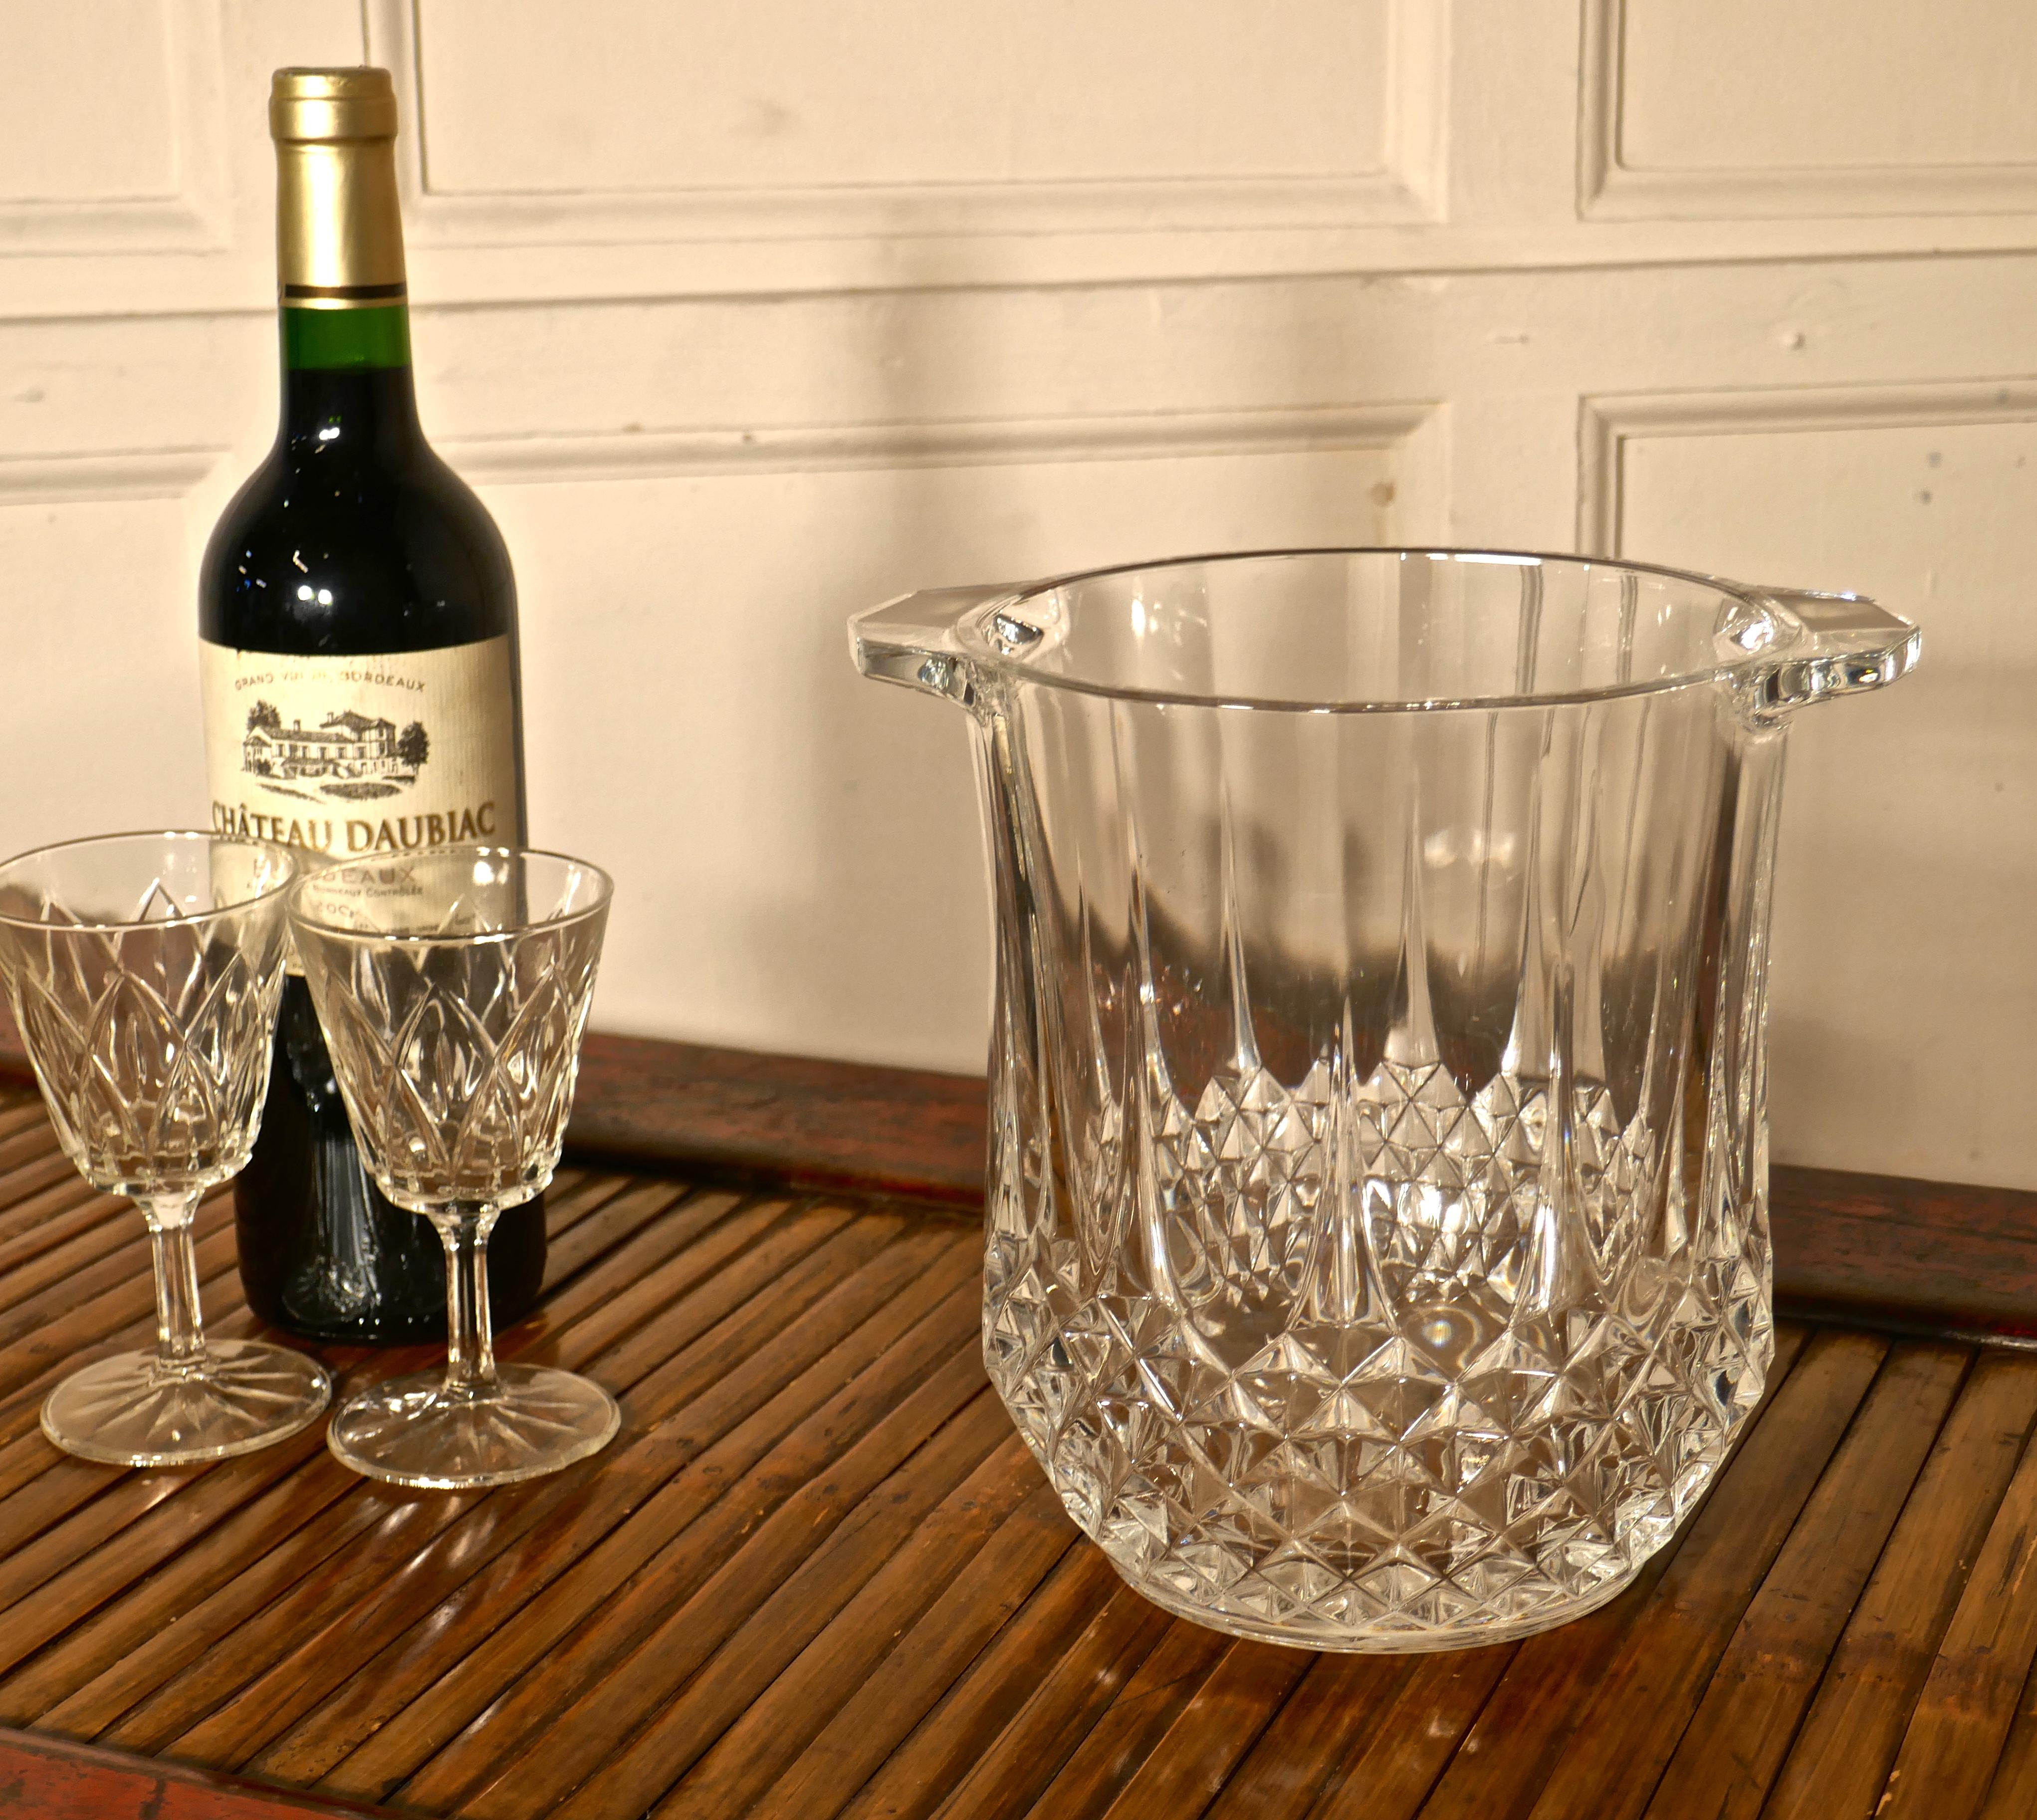 St Louis crystal ice bucket, handcut French crystal wine cooler

This is a favourite design from Saint-Louis since 1928, it has straight elegant lines
Founded in 1586, St Louis crystal has a rich history as purveyors of fine crystal to French